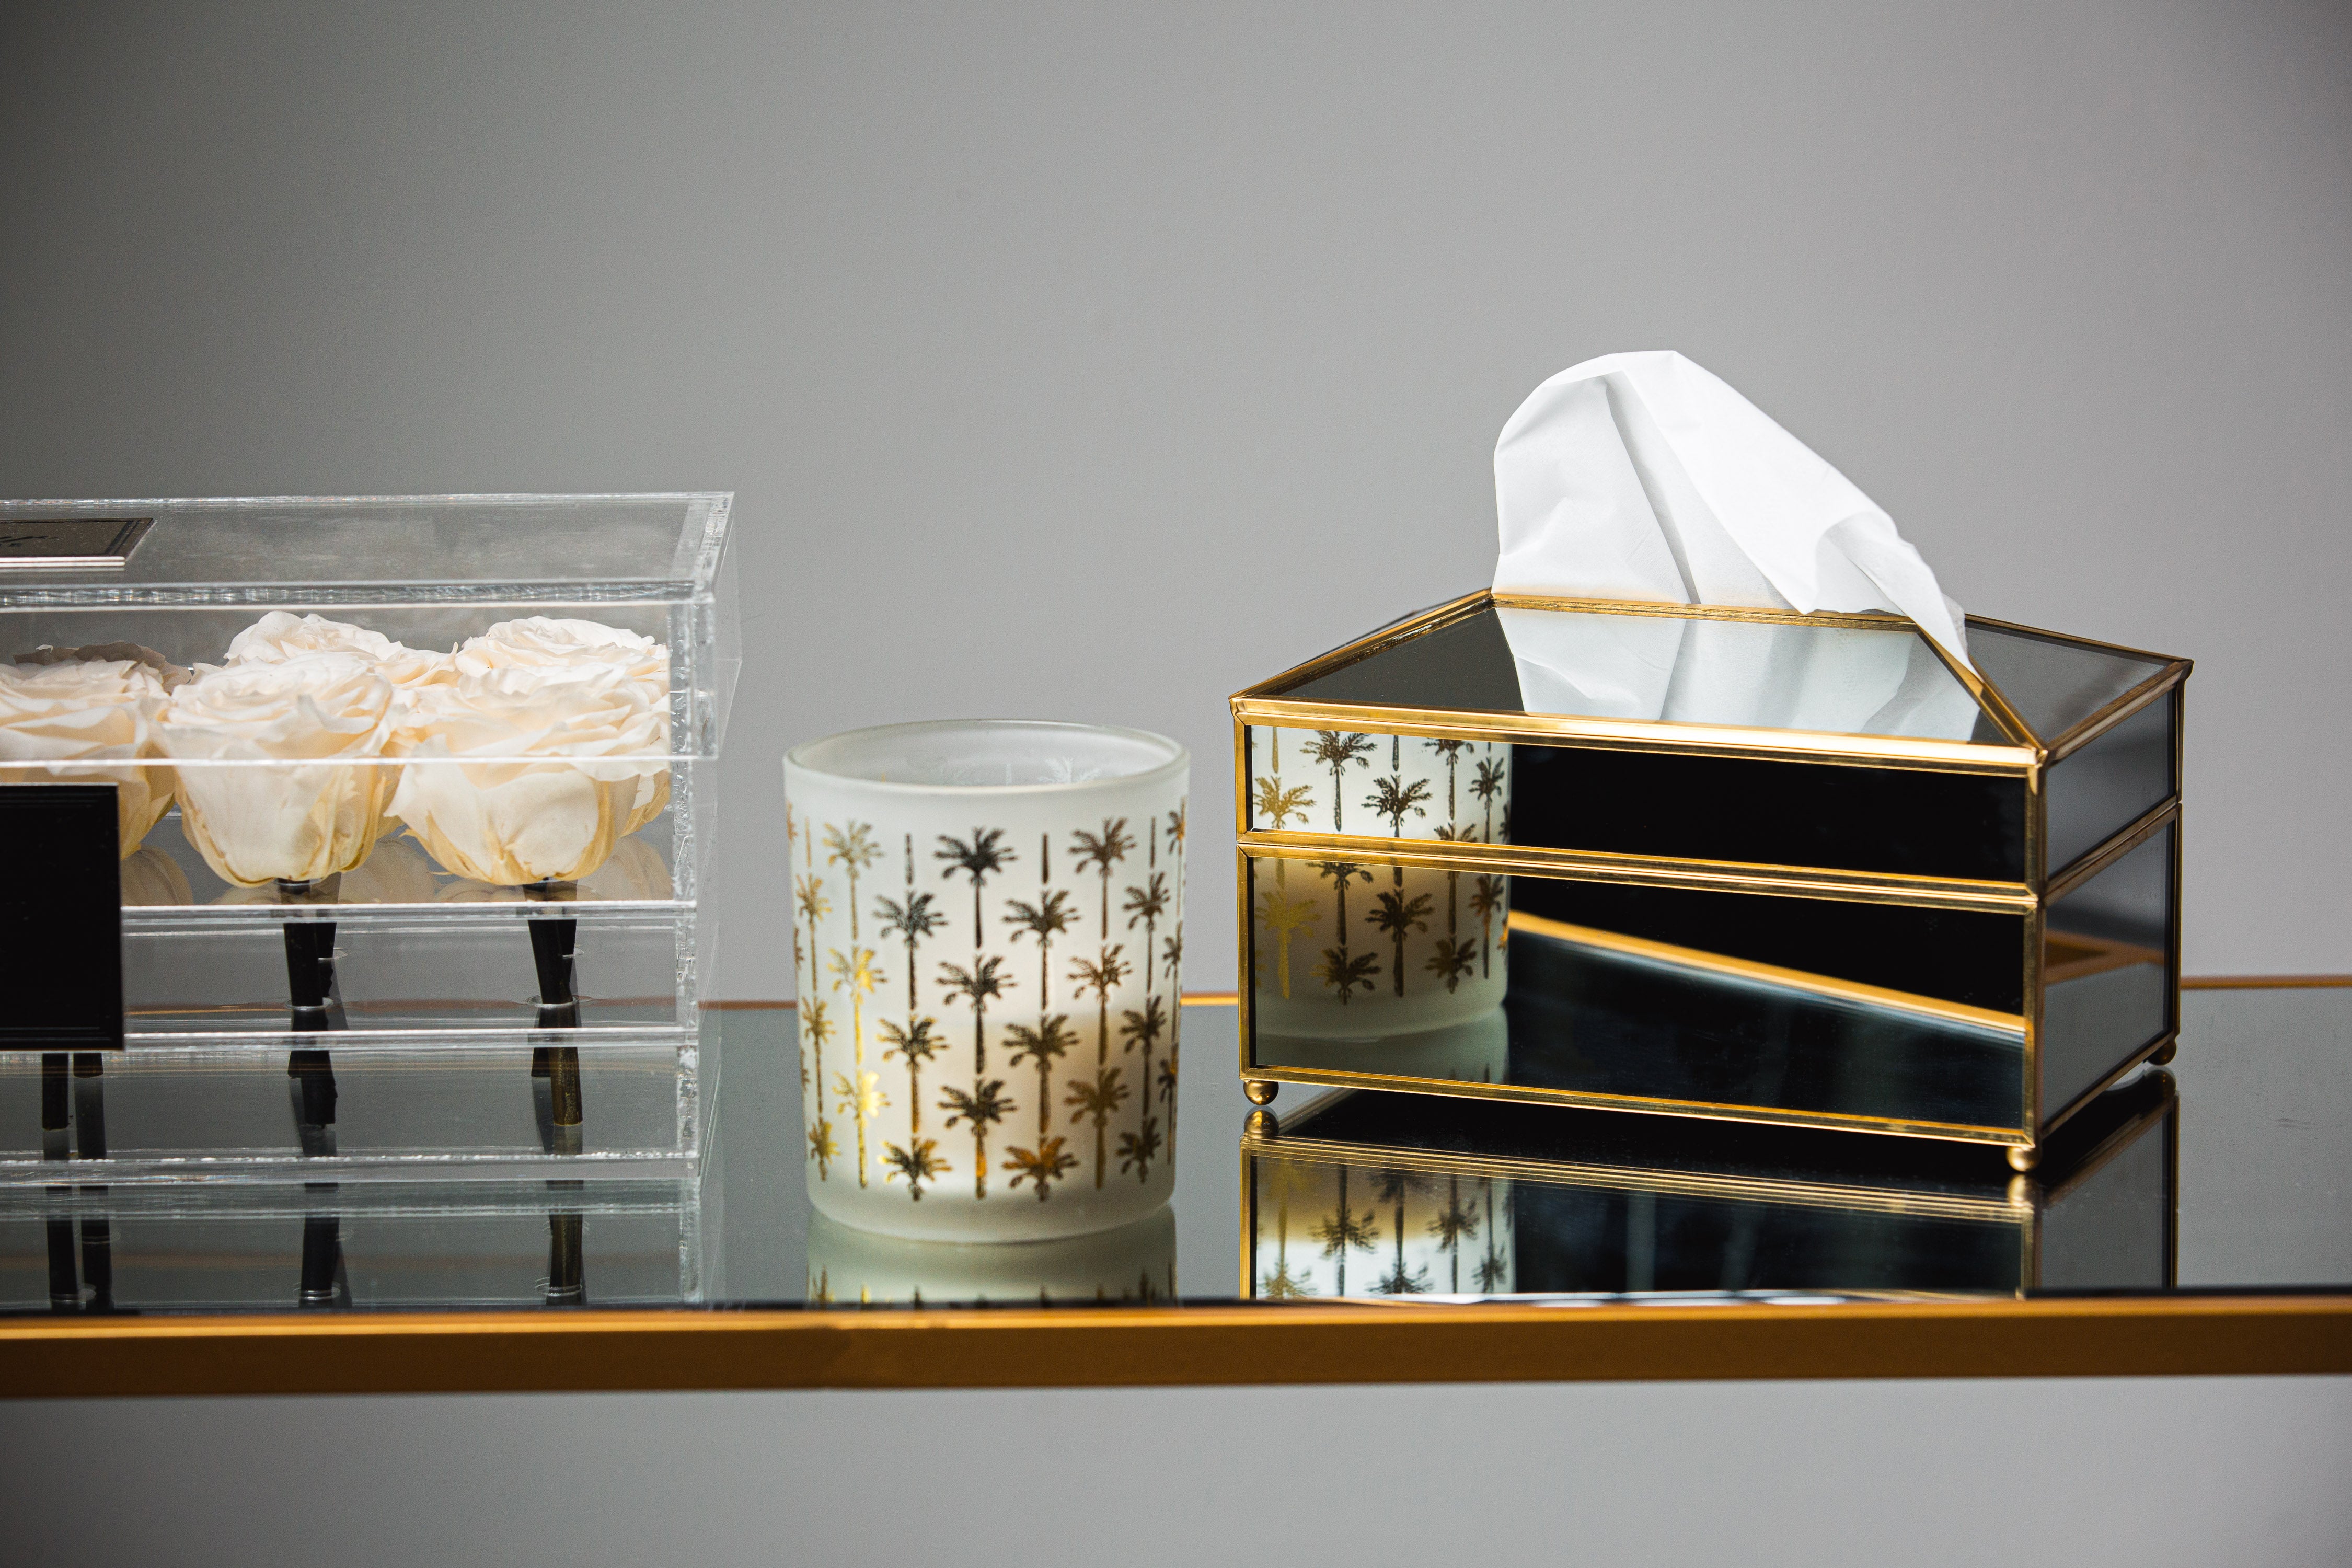 Stainless Steel Tissue Box with Gold Symmetrical Design – High